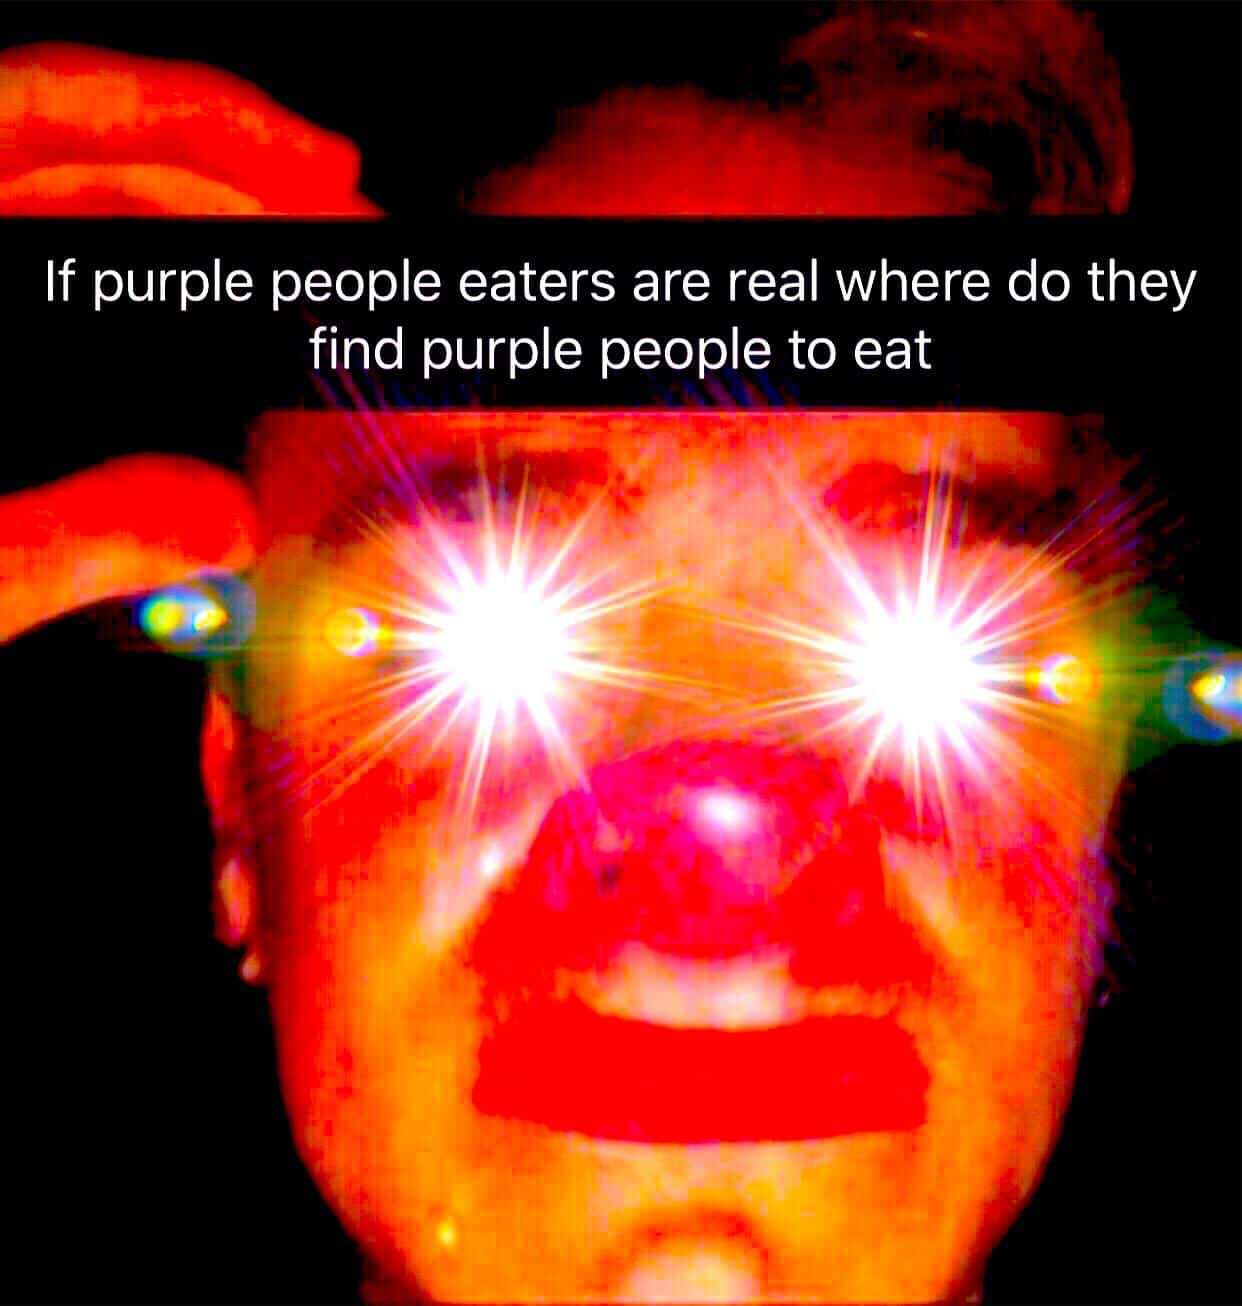 deep-fried deep-fried-memes deep-fried text: If purple people eaters are real where do they find purple people to eat 